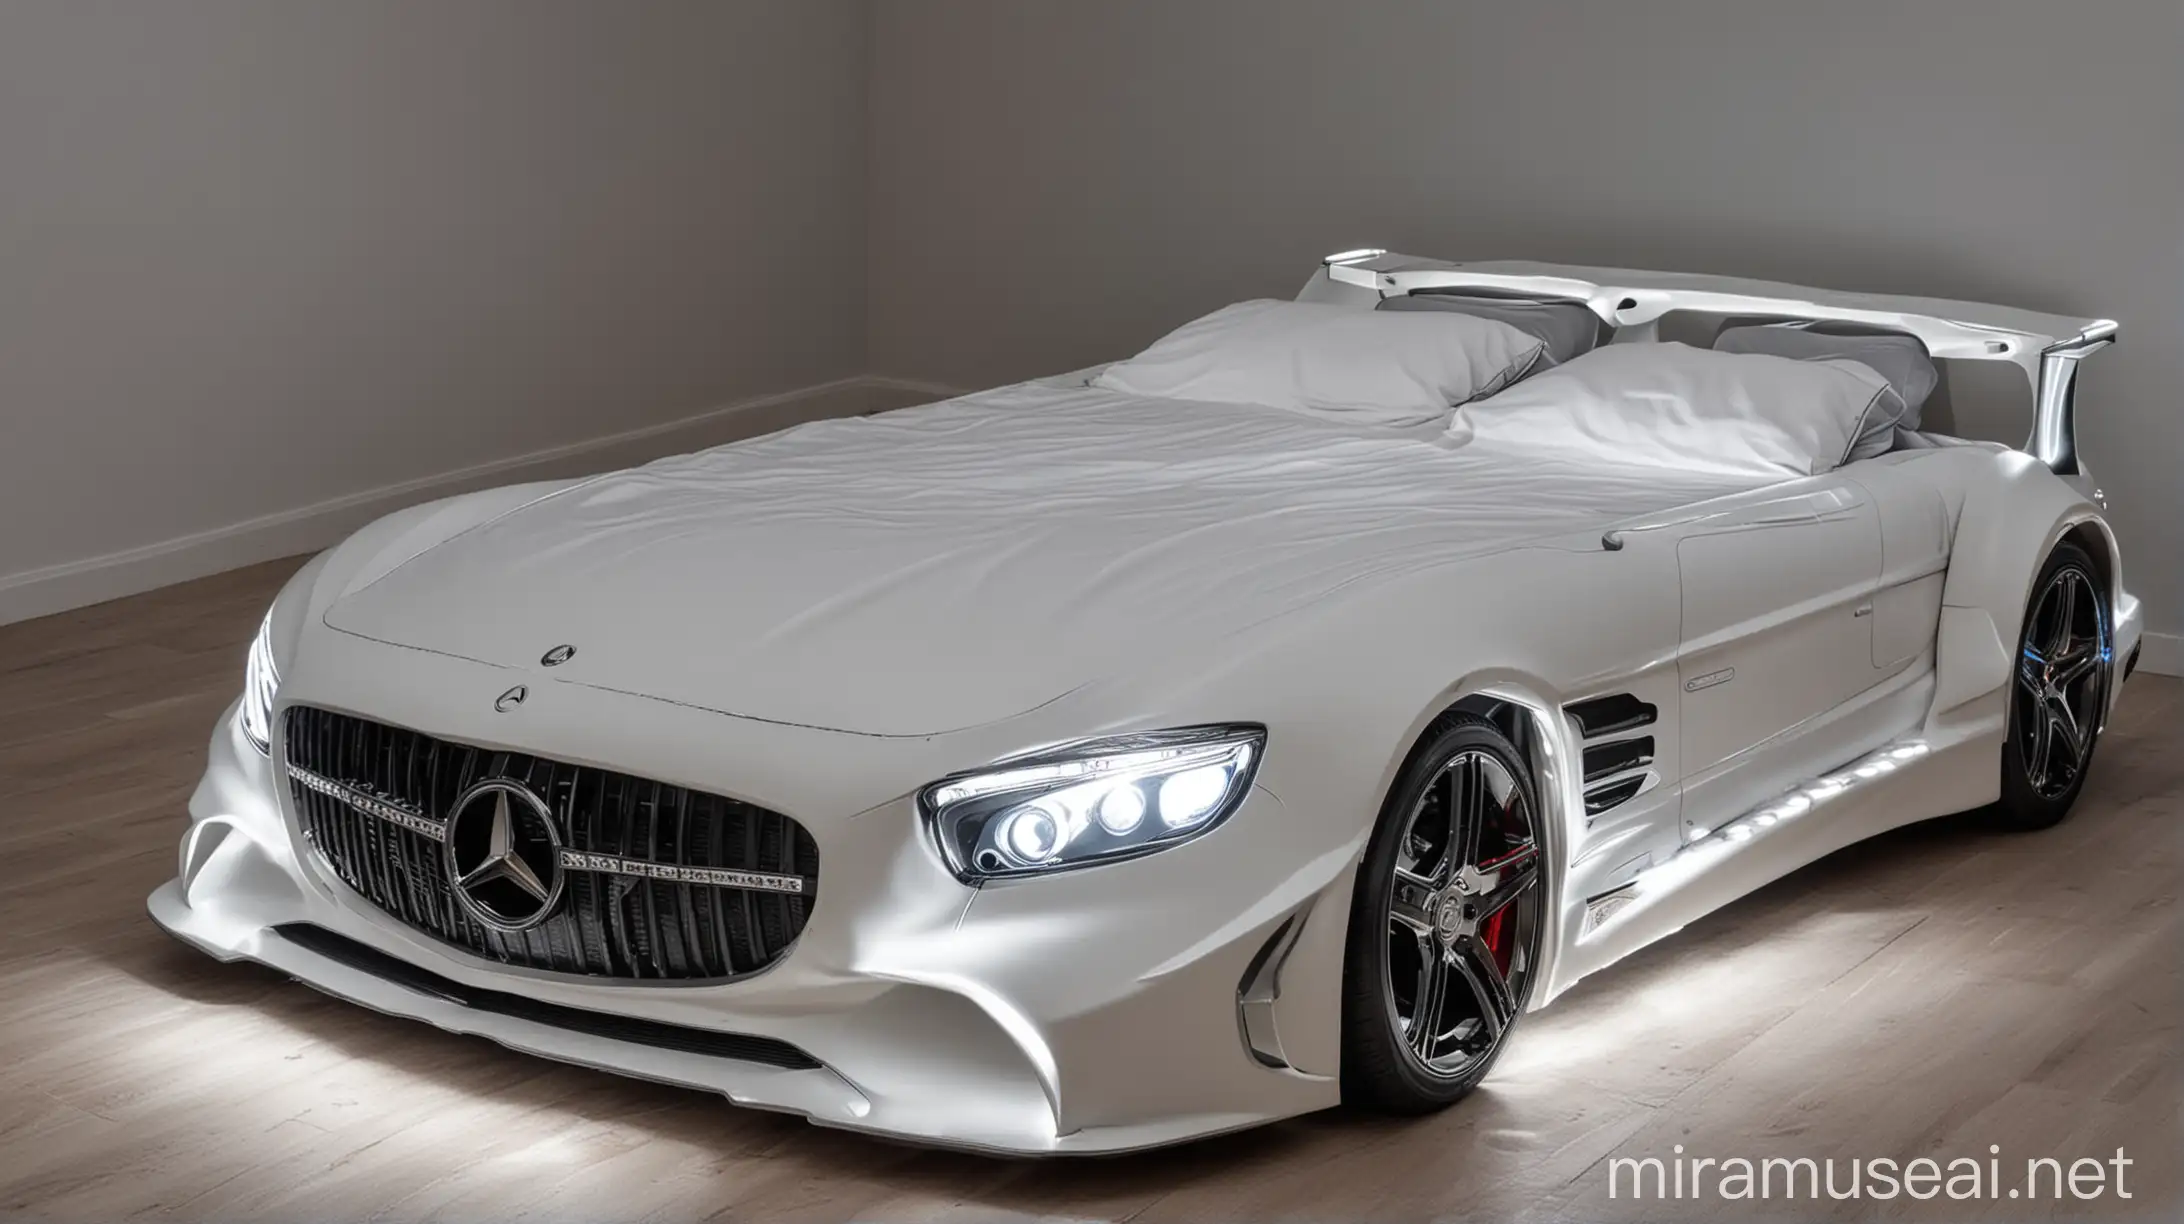 Luxurious Double Bed Shaped like Mercedes AMG Car with Illuminated Headlights